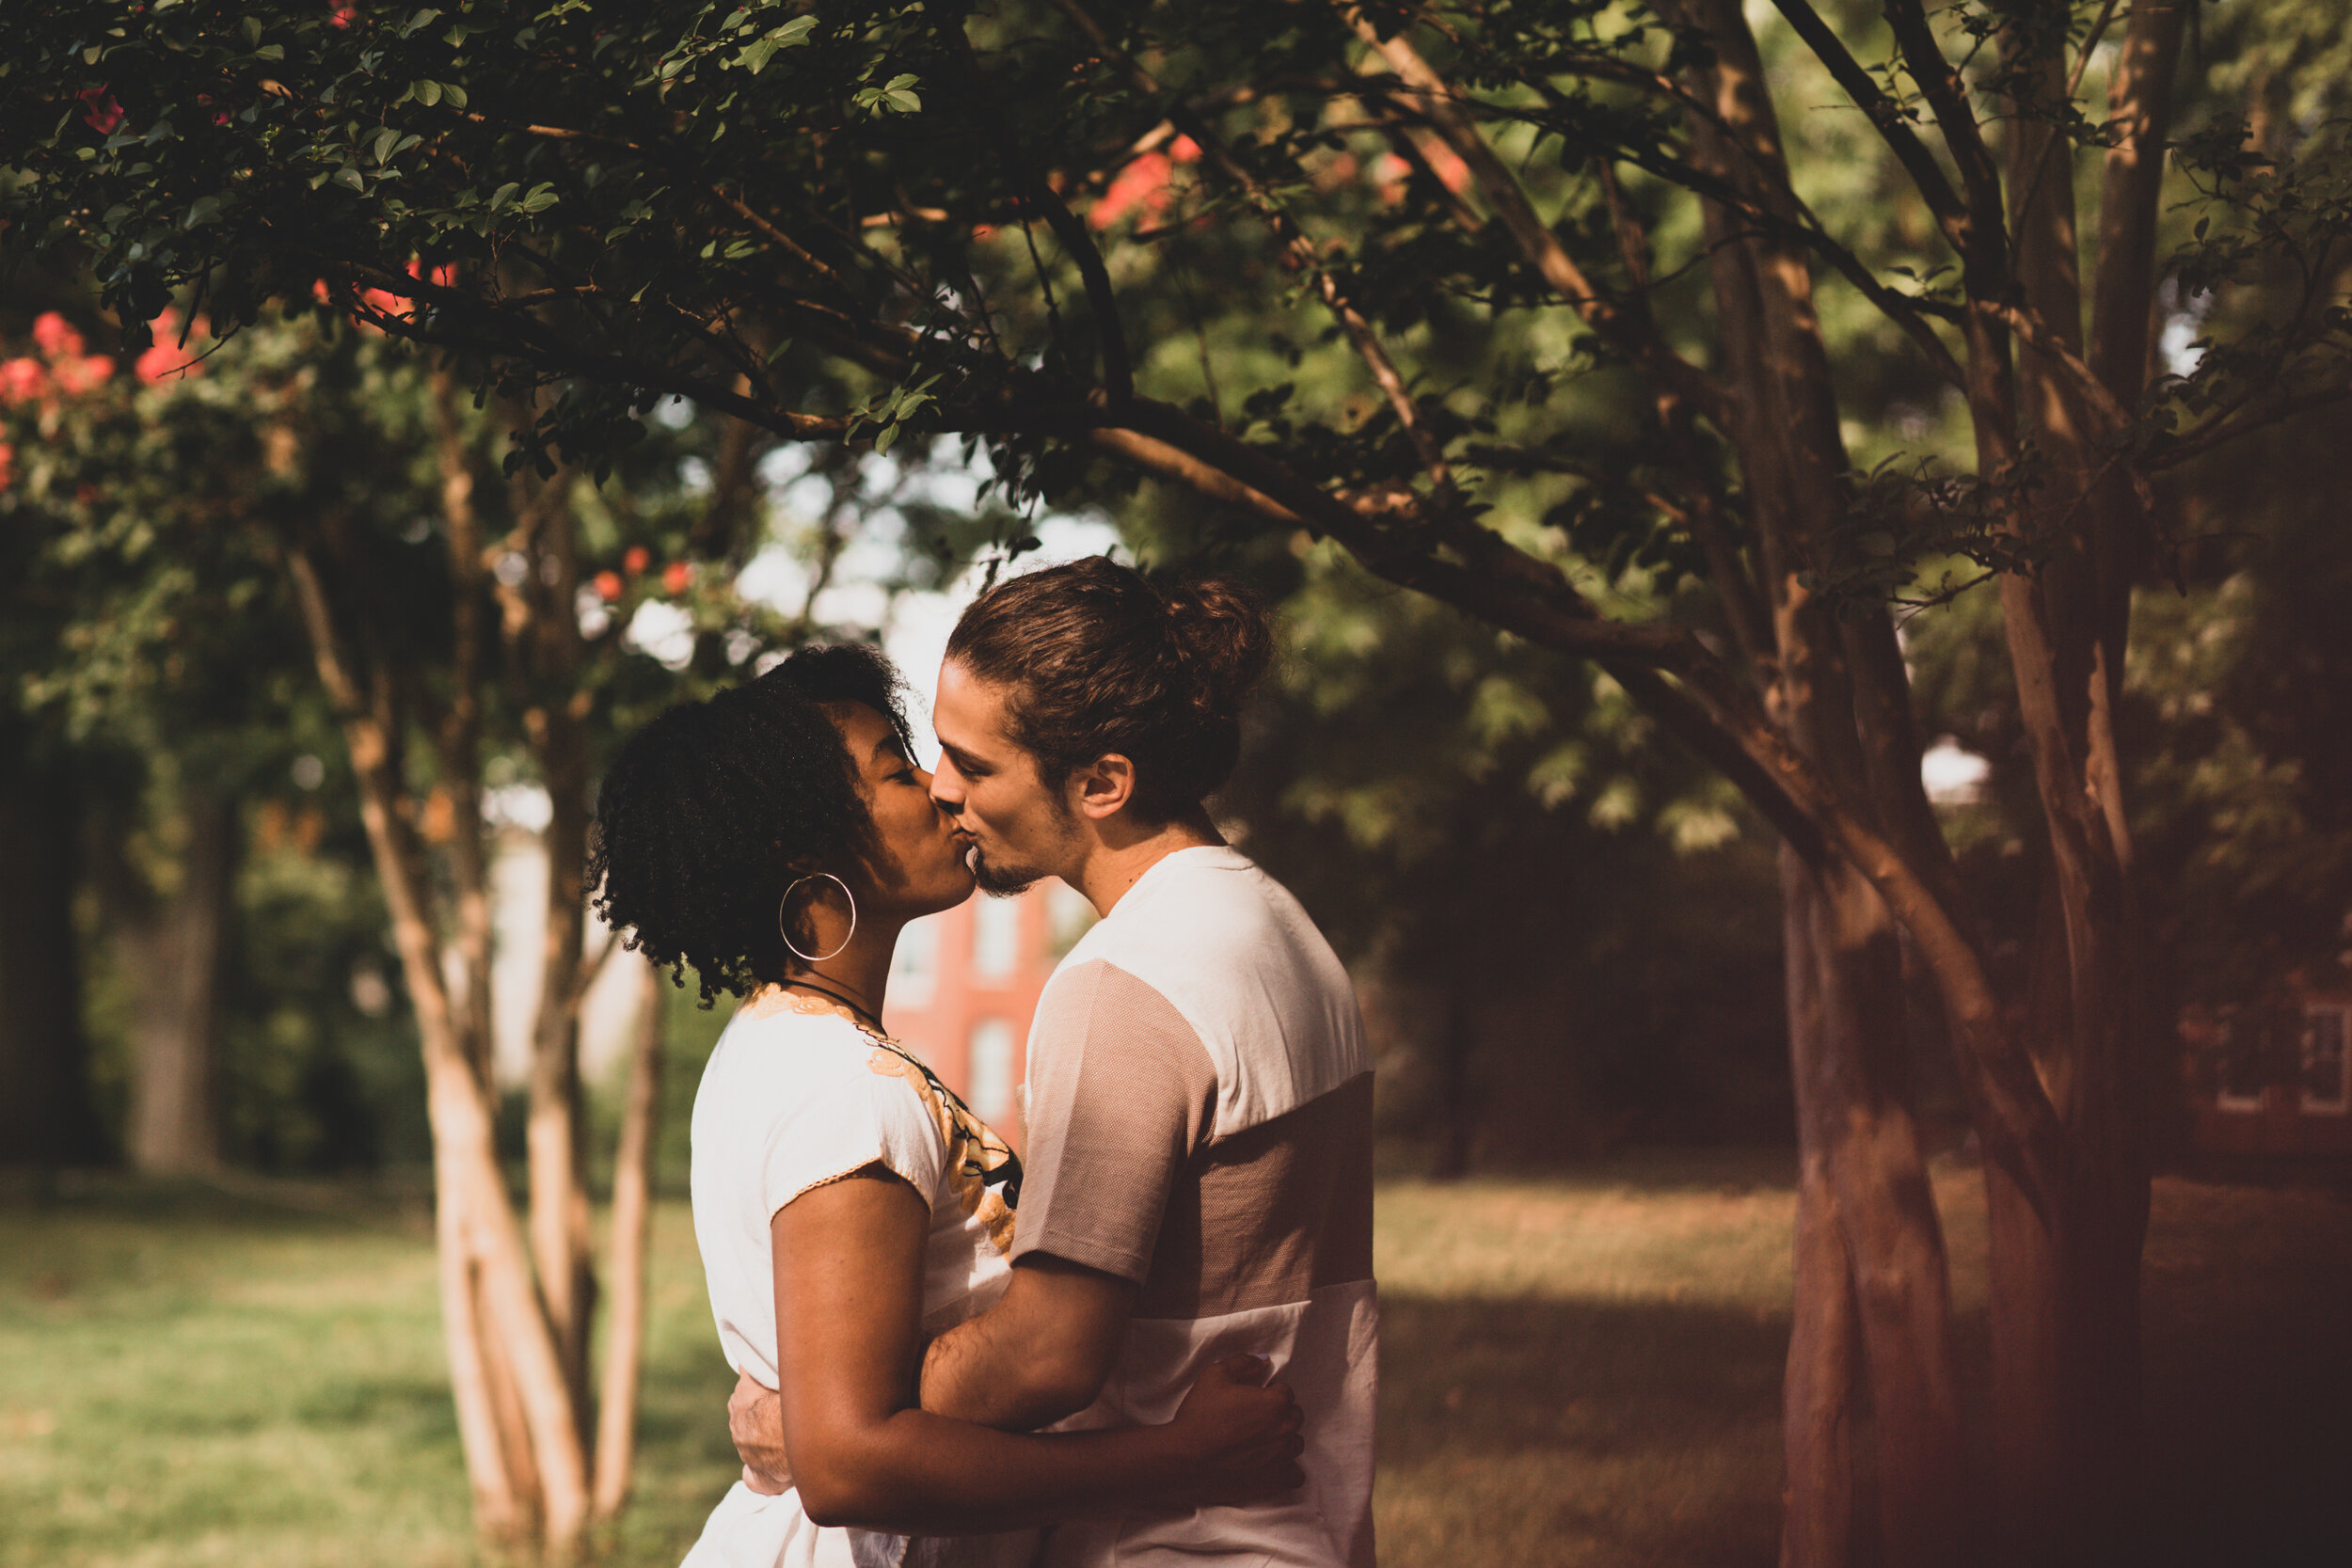 Golden Hour Engagement Session in Baltimore Maryland Patterson Park Pagoda DC Wedding Photographers Megapixels Media Photography and Videography Mixed Couple Multiracial Bride and Groom-41.jpg